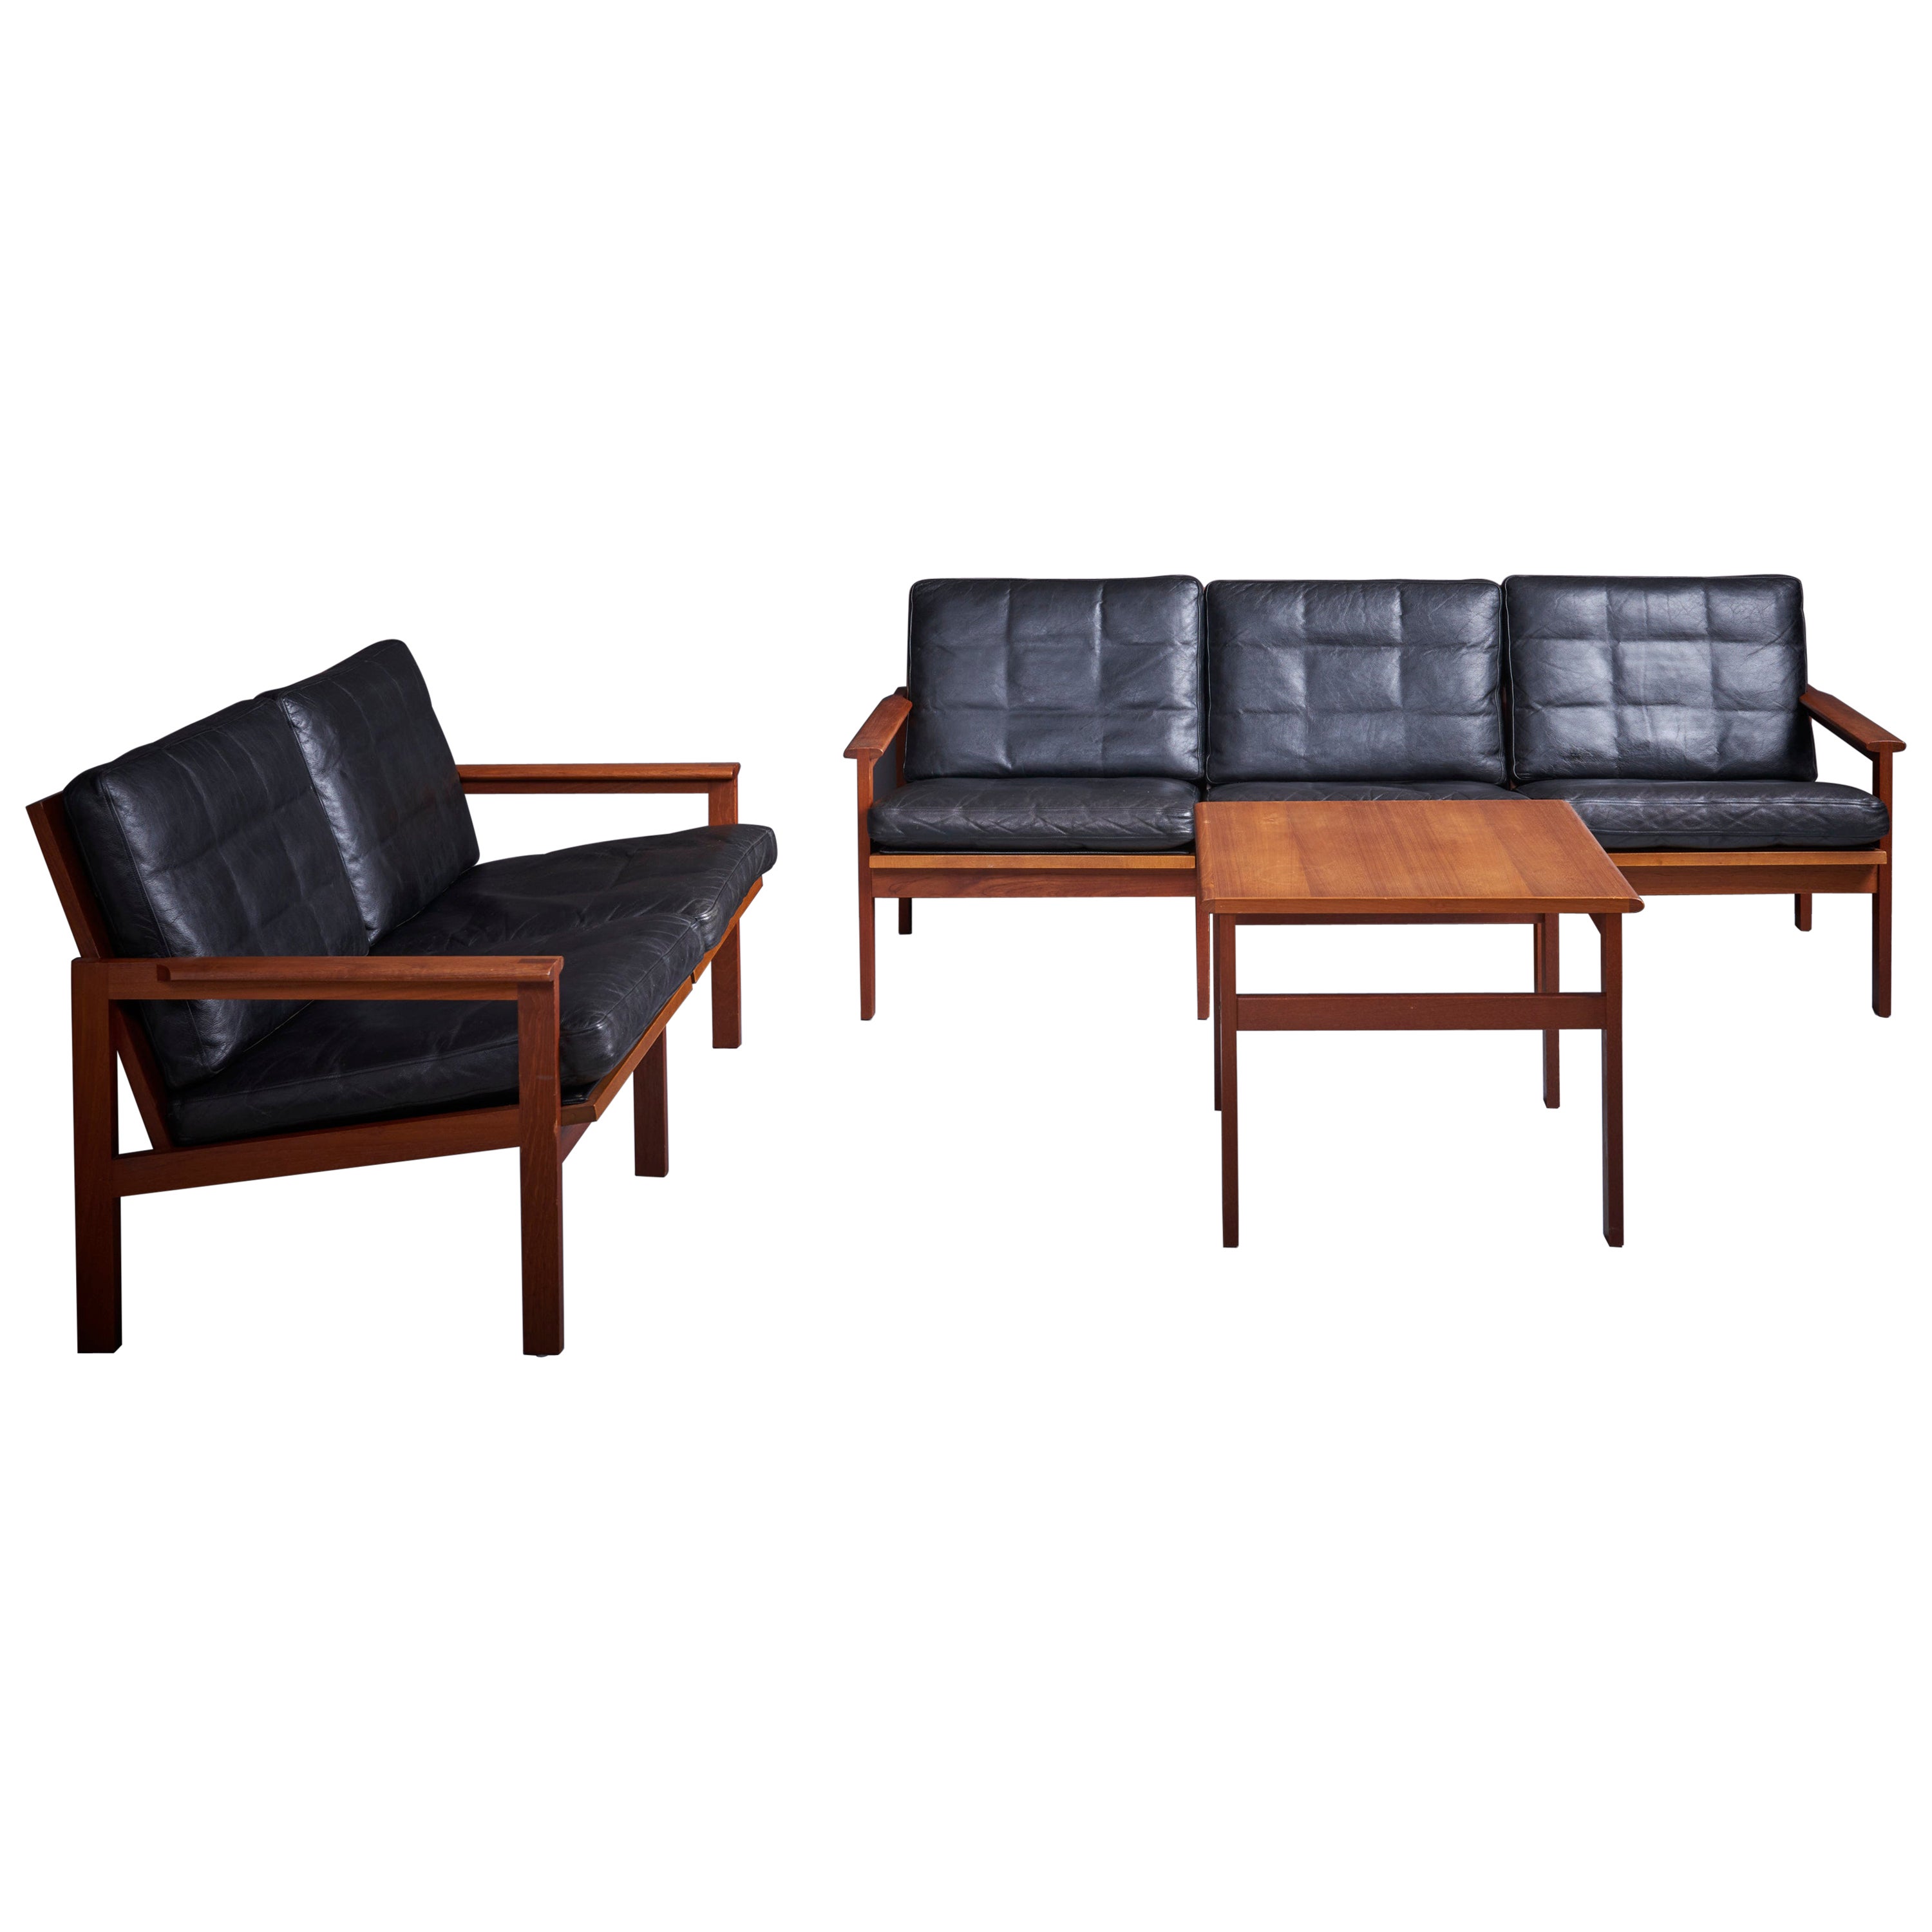 Illum Wikkelso 'Capella' Set of 2x Black Leather Sofa & Side Table Denmark 1960s For Sale